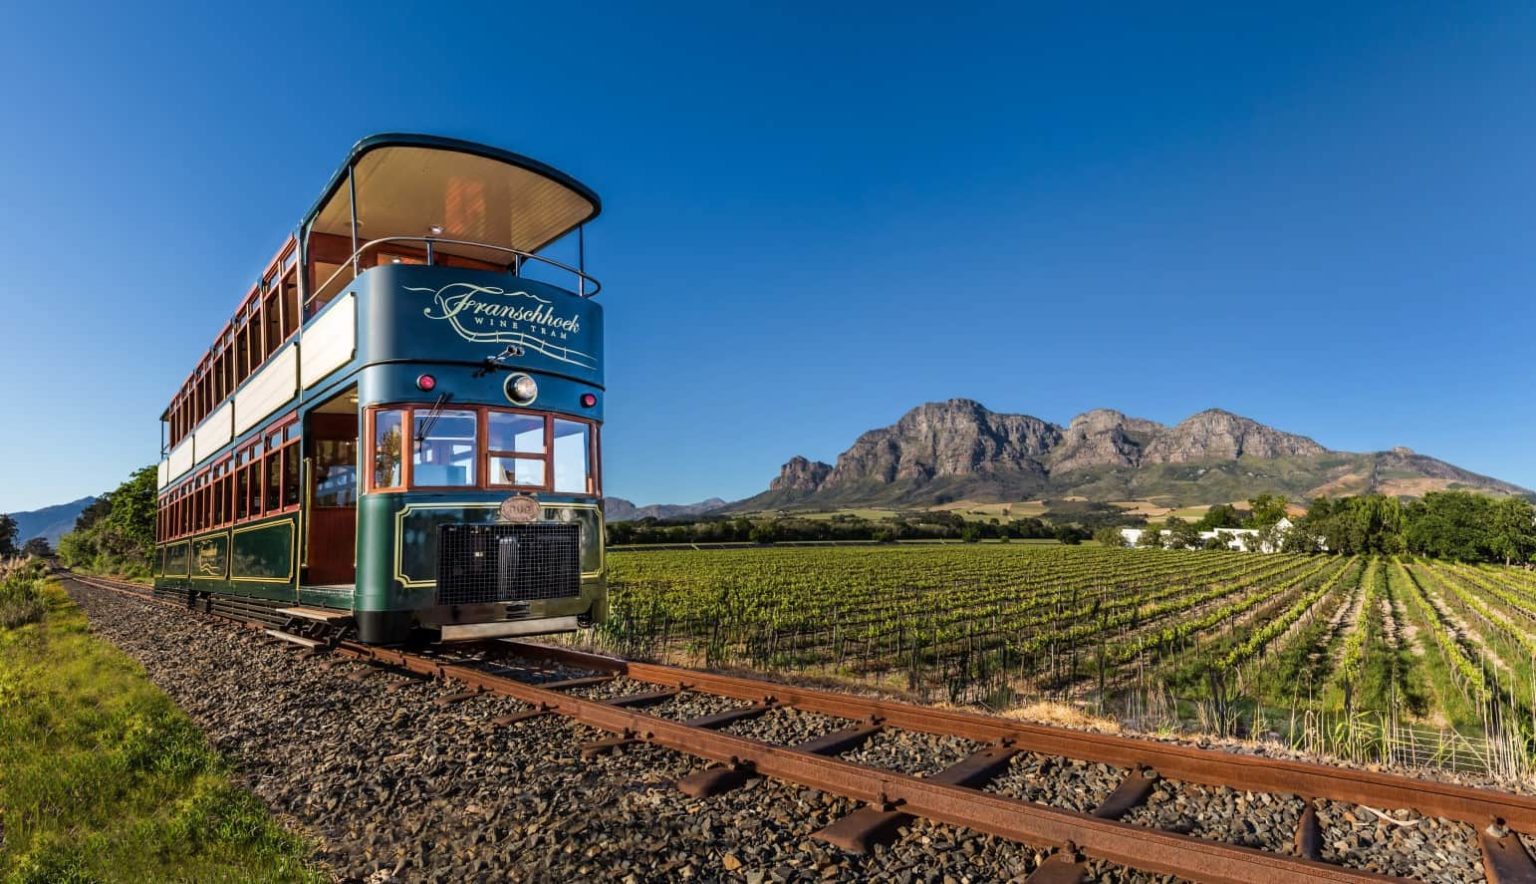 tram on railroad tracks going past vineyards and mountains on a clear day on a Africa food and wine safari